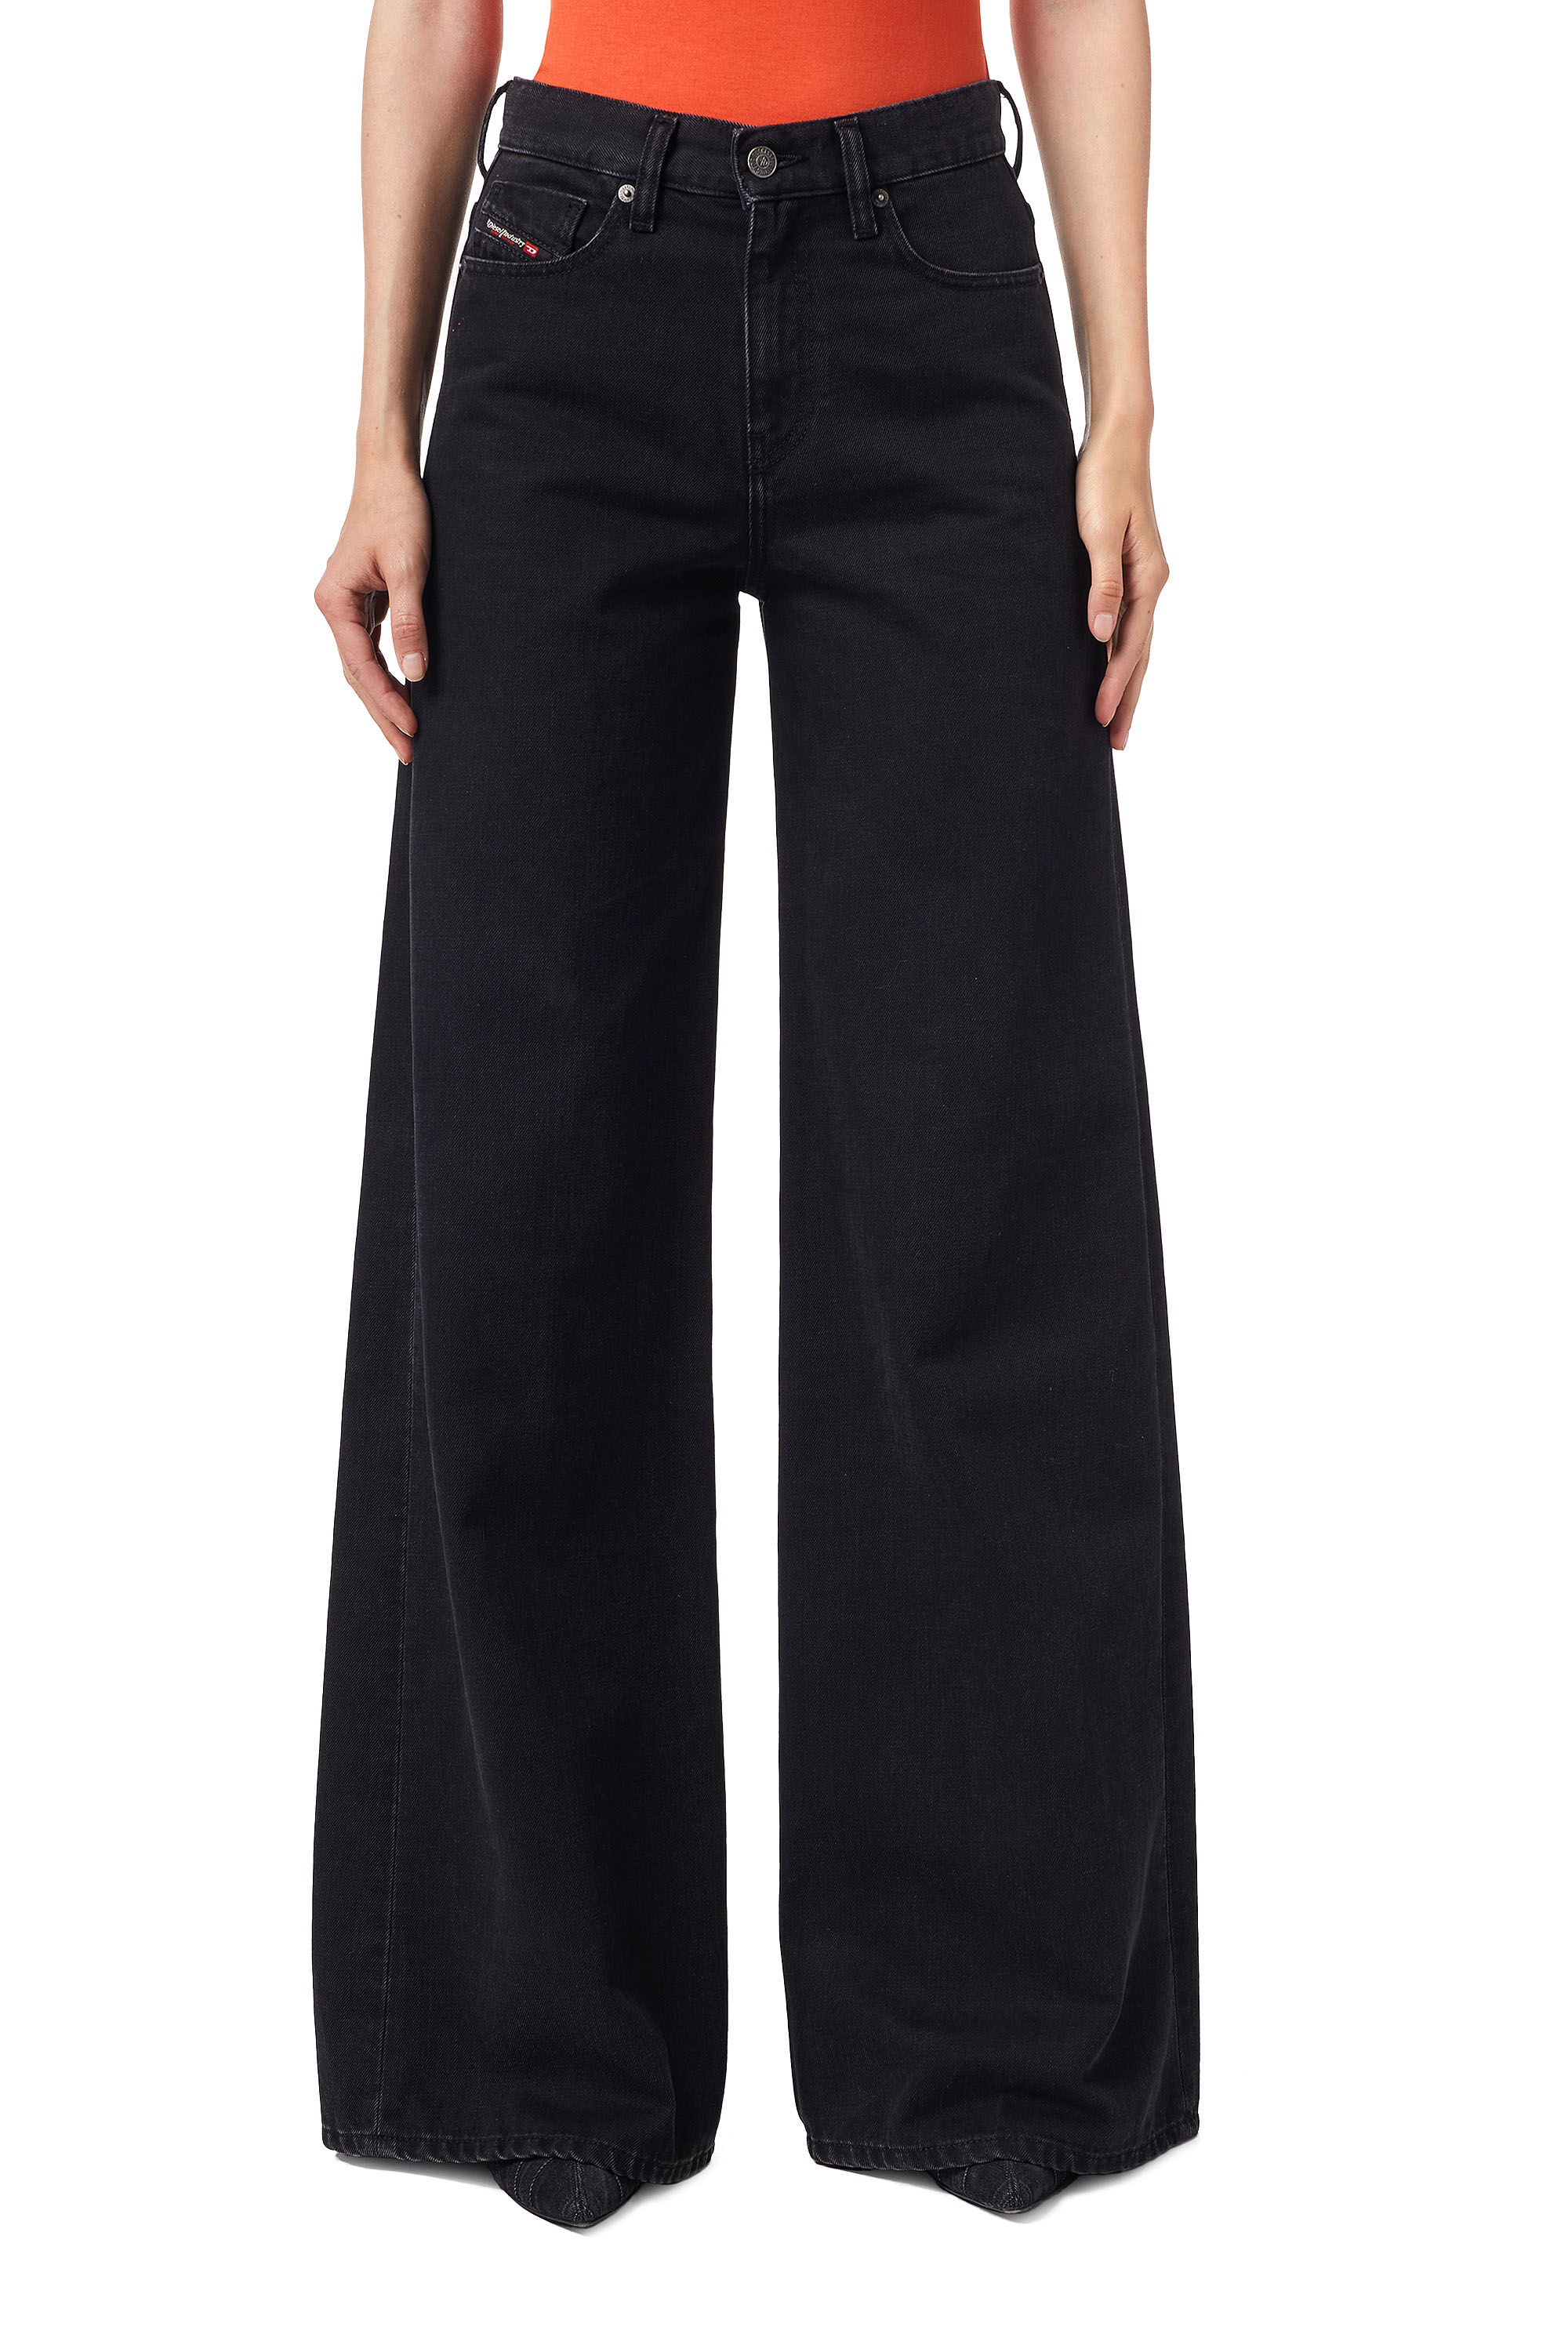 Diesel - D-Akemi Z09RL Bootcut and Flare Jeans,  - Image 3